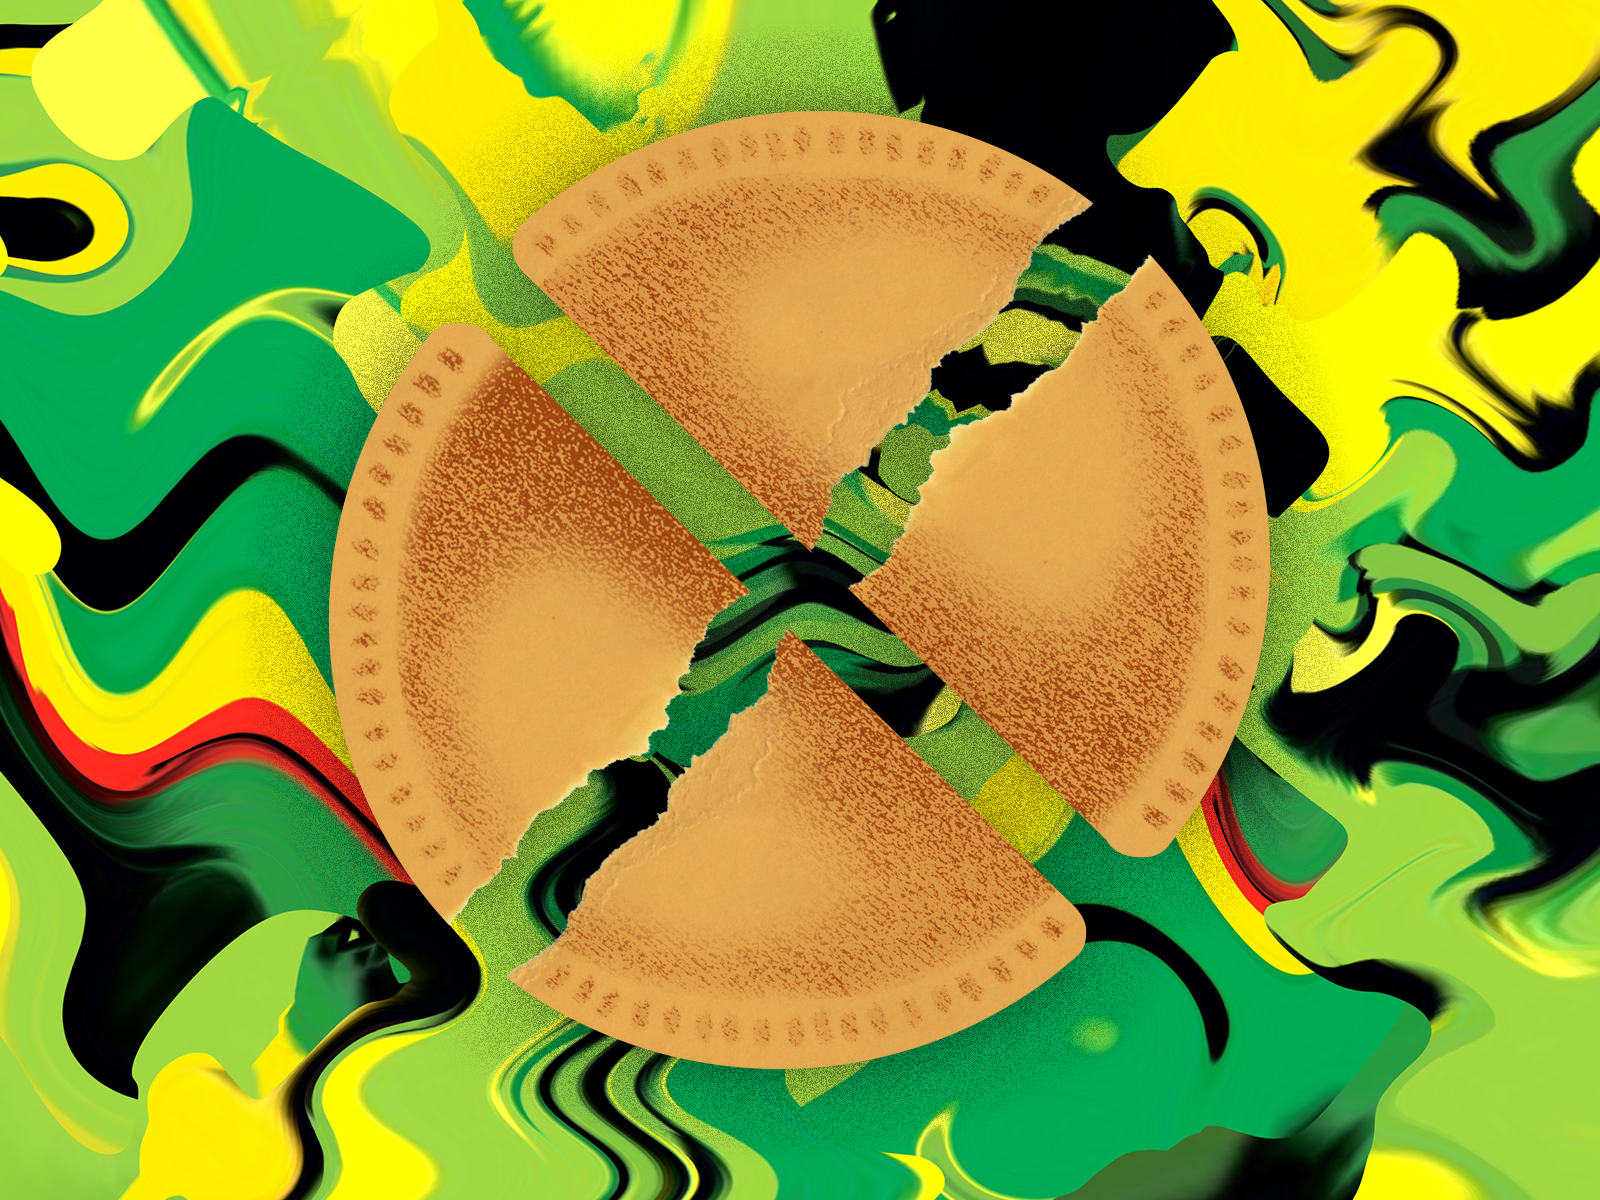 Crumbly Jamaican patties split roughly into four pieces against a vivid abstract background in green, yellow, black, and red.